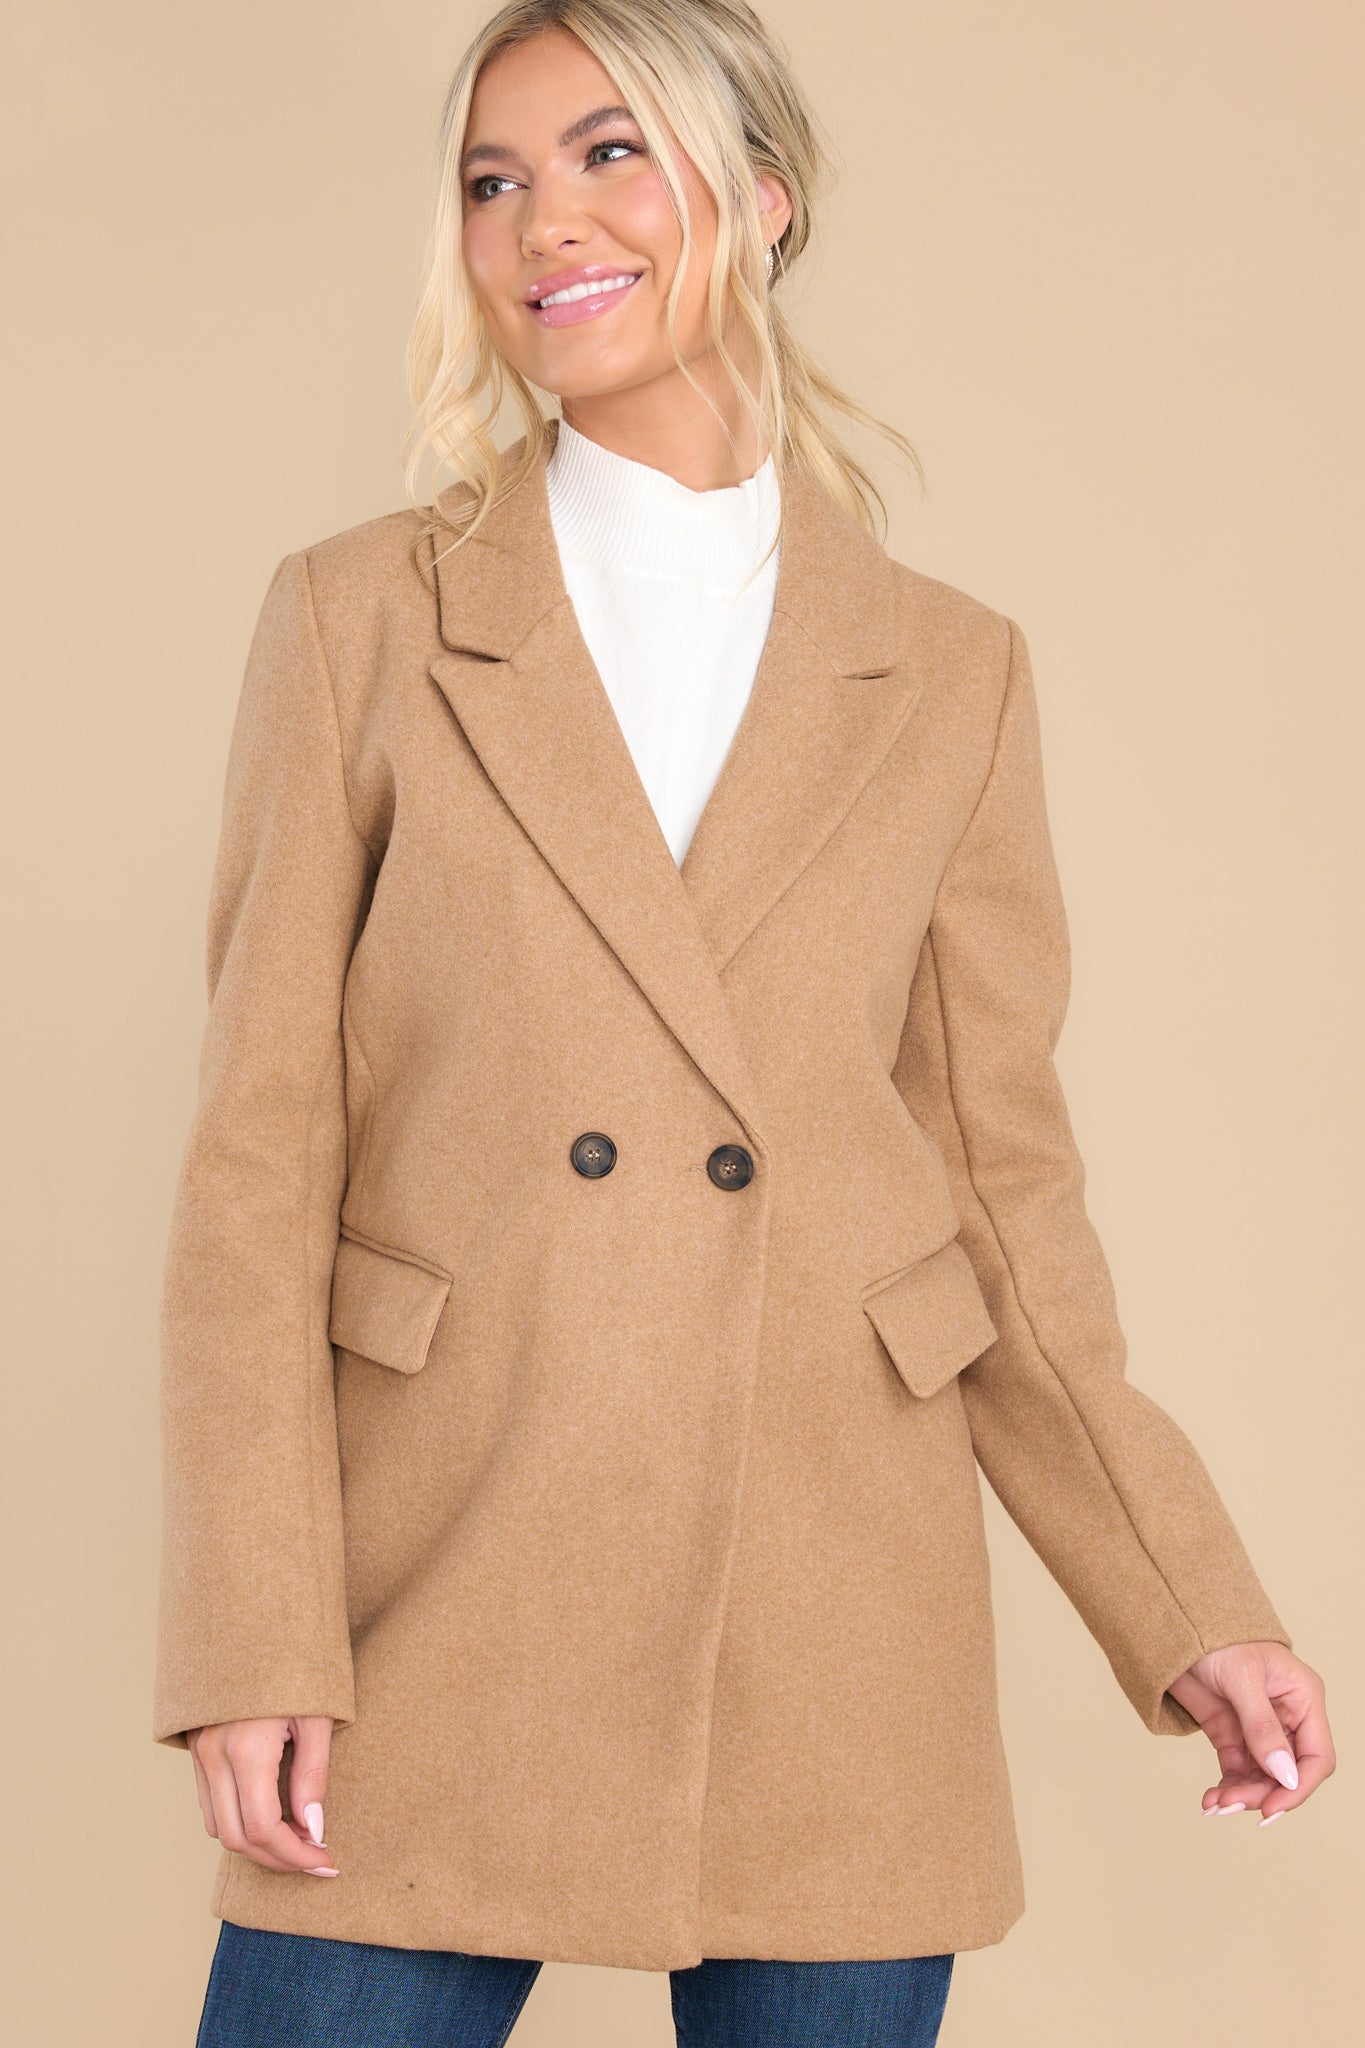 Level With Me Tan Coat - Red Dress